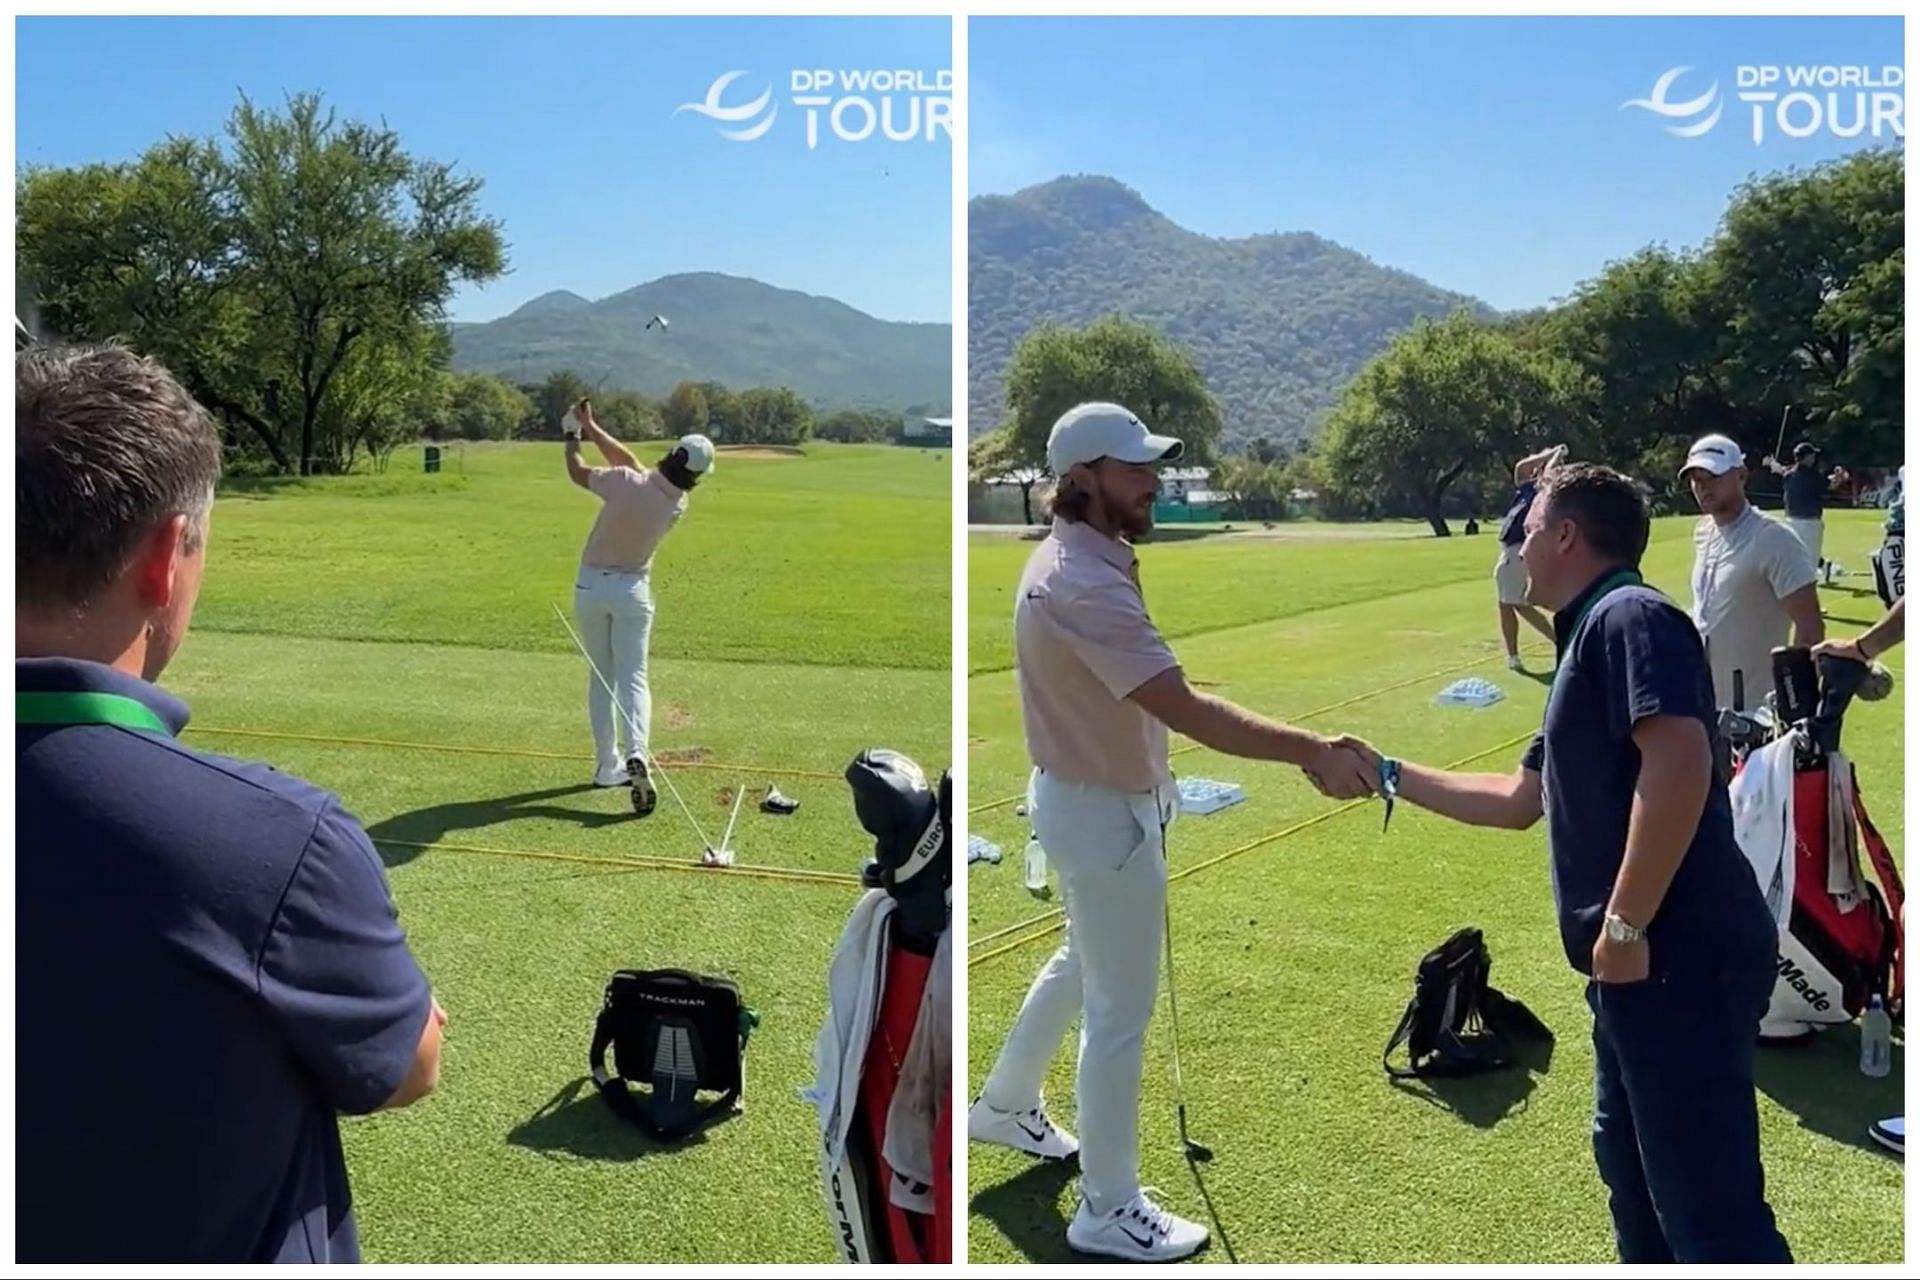 Michael Owen interacted with Tommy Fleetwood during the first round of Nedbank Golf Challenge (Image via Twitter.com/DPWorldTour)